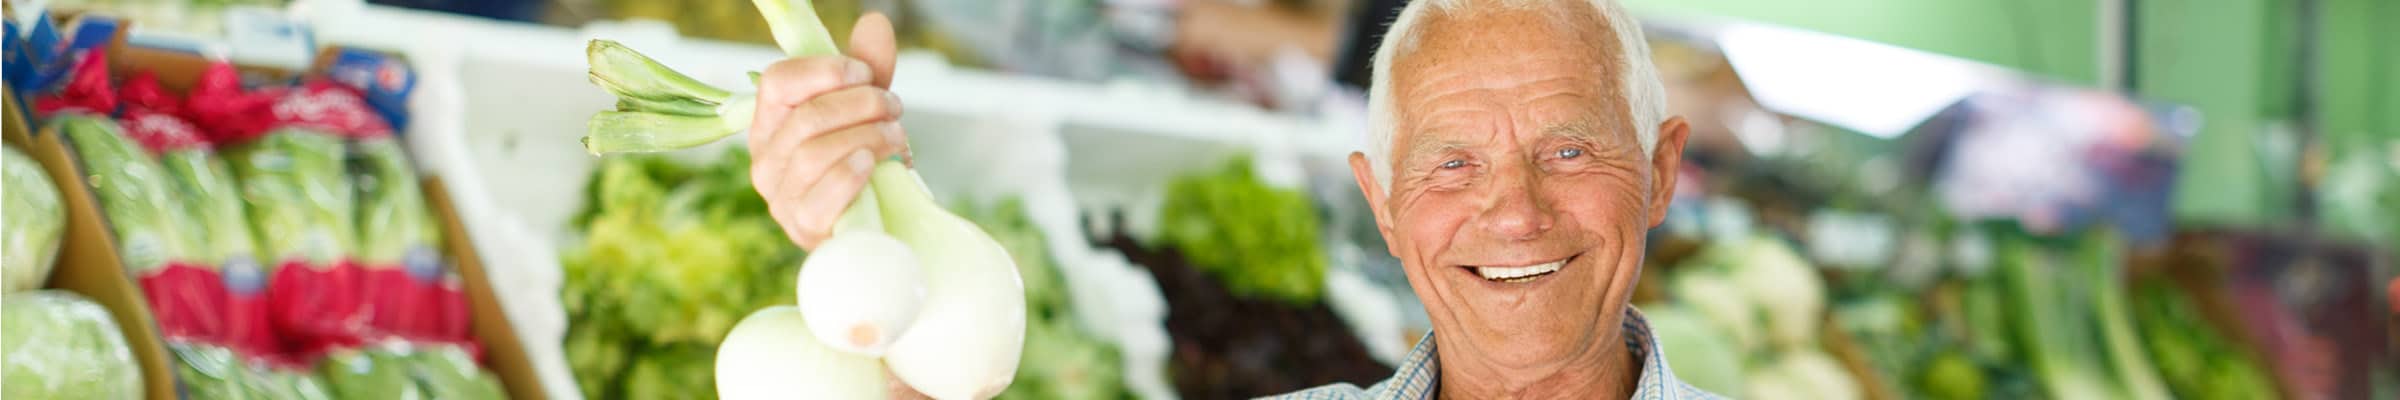 Older male is smiling and holding up a bundle of leeks in his hand, standing in the produce section of a grocery store.